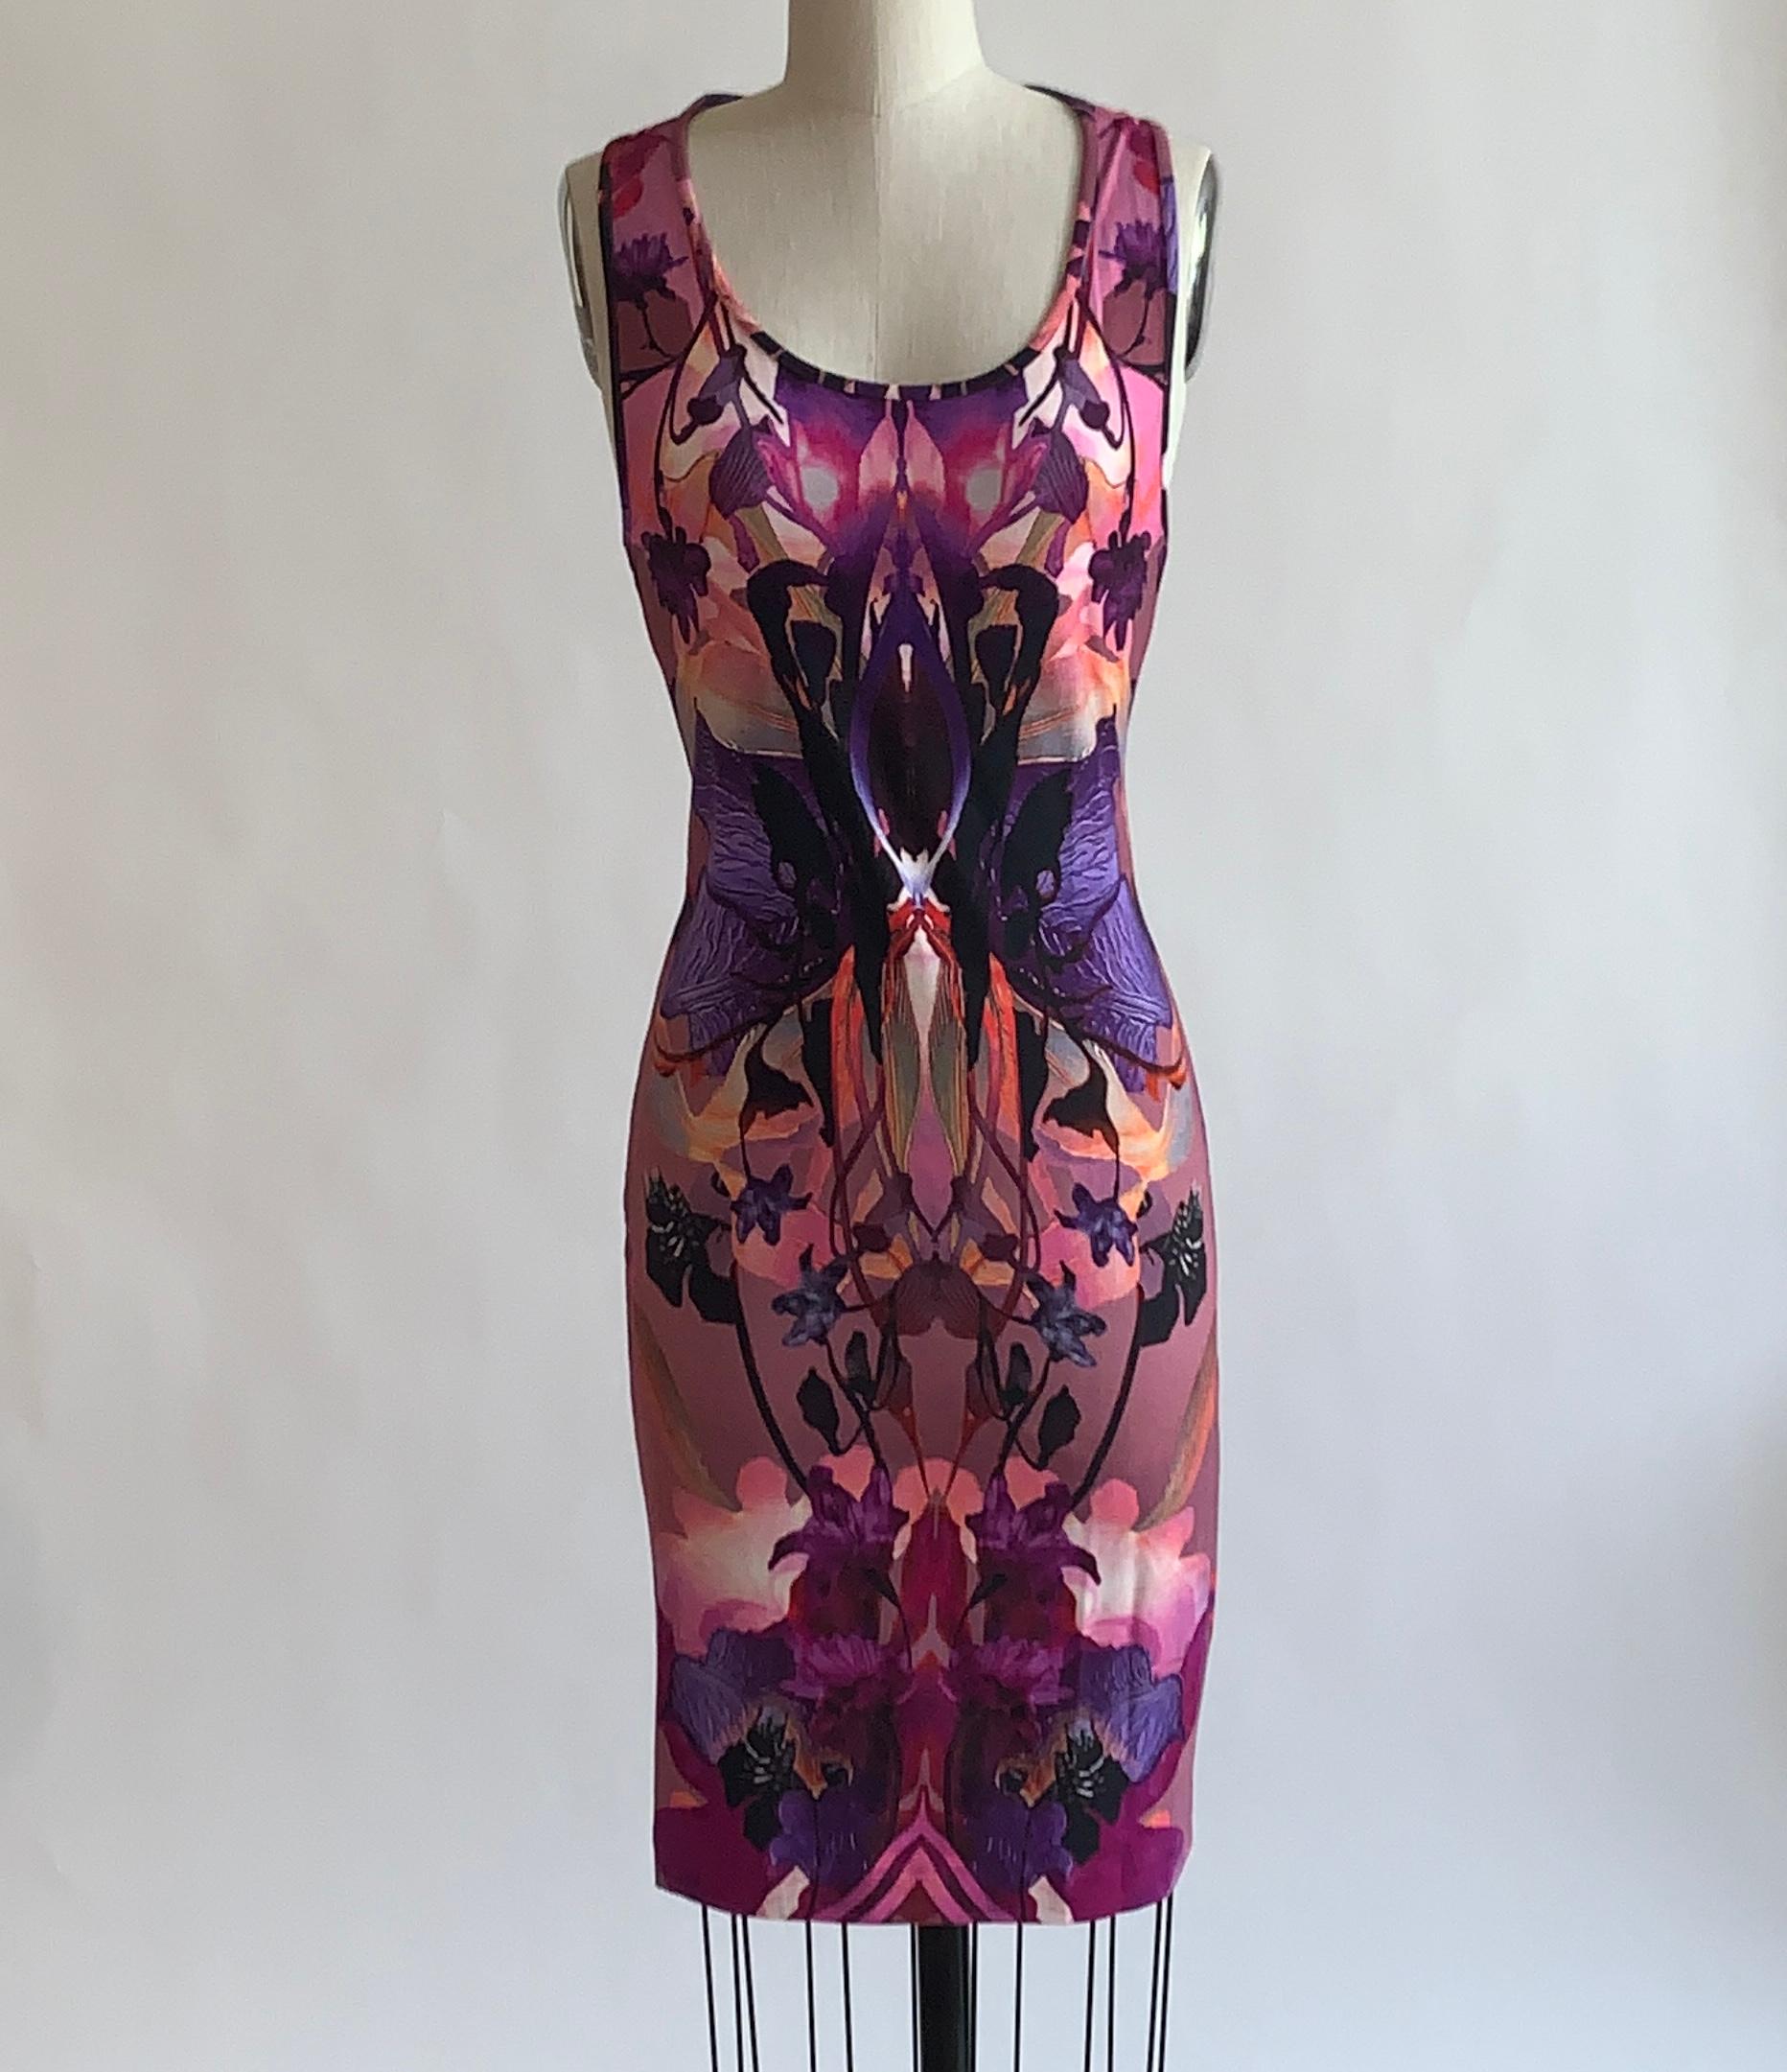 Alexander Mcqueen 2010 pink and purple orchid and floral digital print dress in super soft jersey. Sleeveless with racerback. Pull on, no closure. Content labels indicate that this was a sample/special project, we're not sure if the style ever made